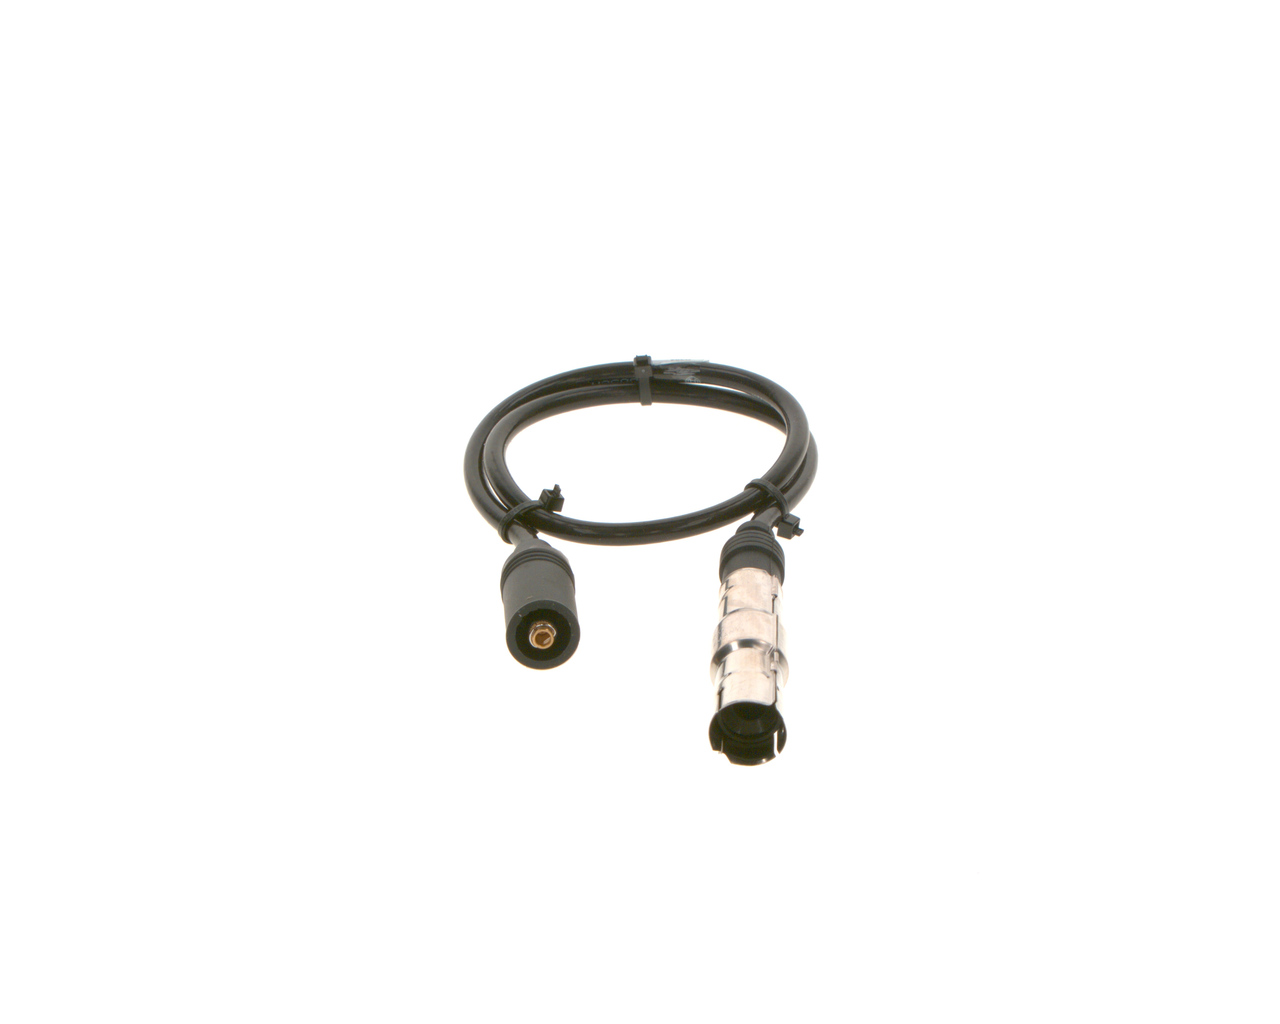 0986356304, Ignition Cable Kit, BOSCH, N10204402, N10243611, 0515, 7240, 998, B304, ZEF1223, 9524